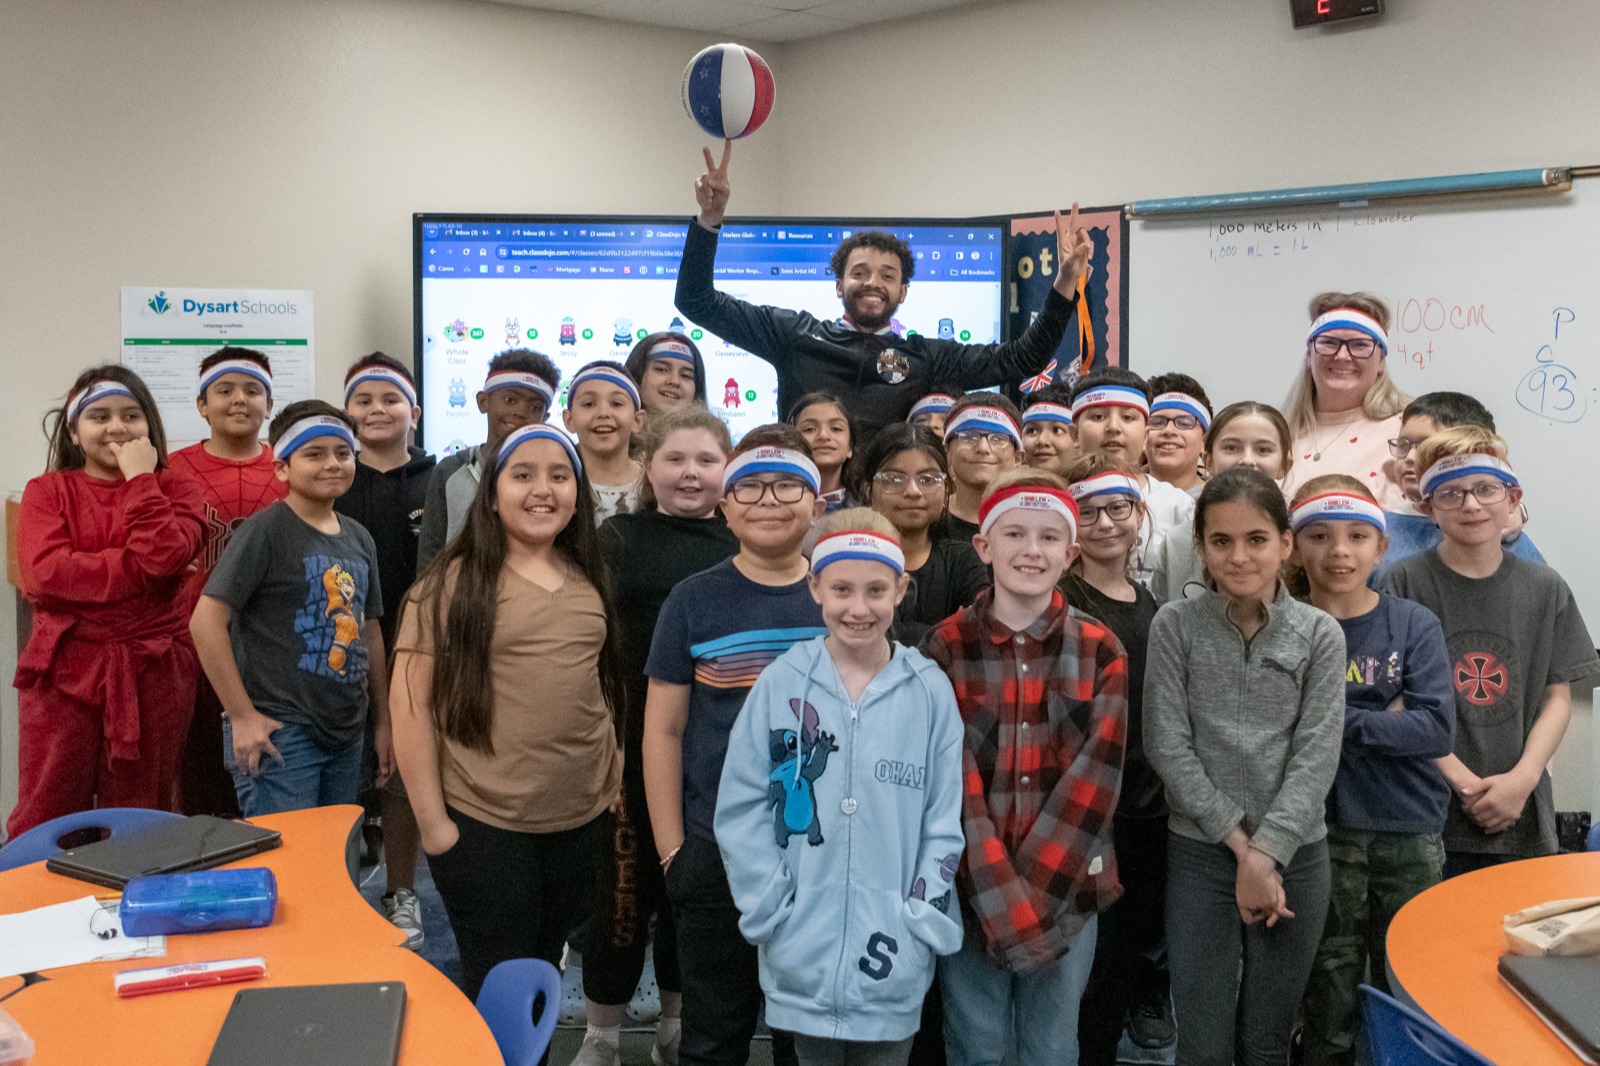 Class with the Harlem Globetrotters